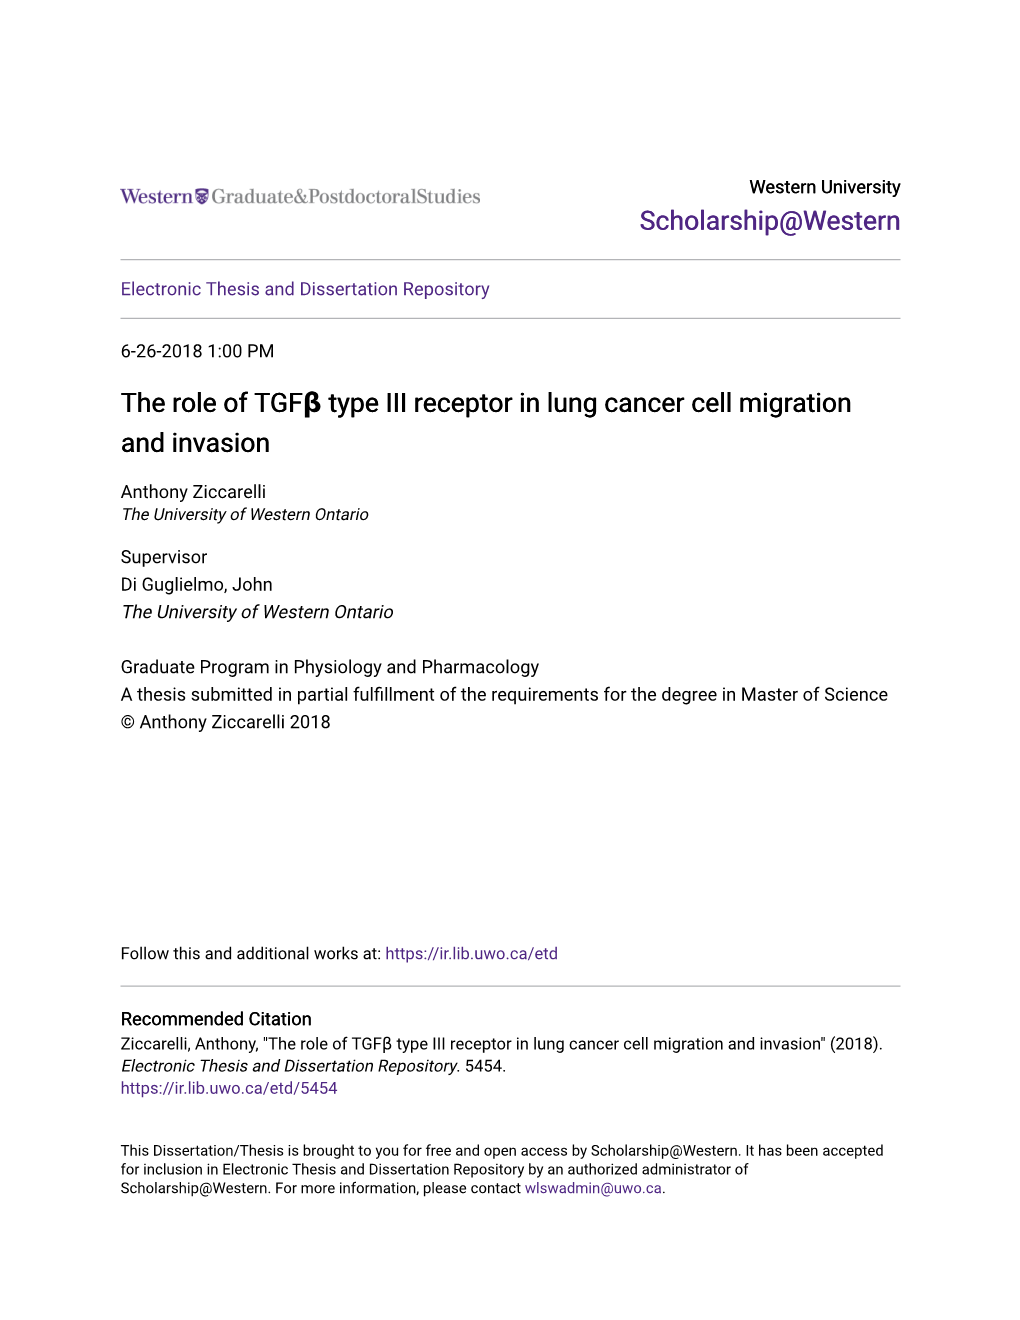 The Role of TGFÎ² Type III Receptor in Lung Cancer Cell Migration And